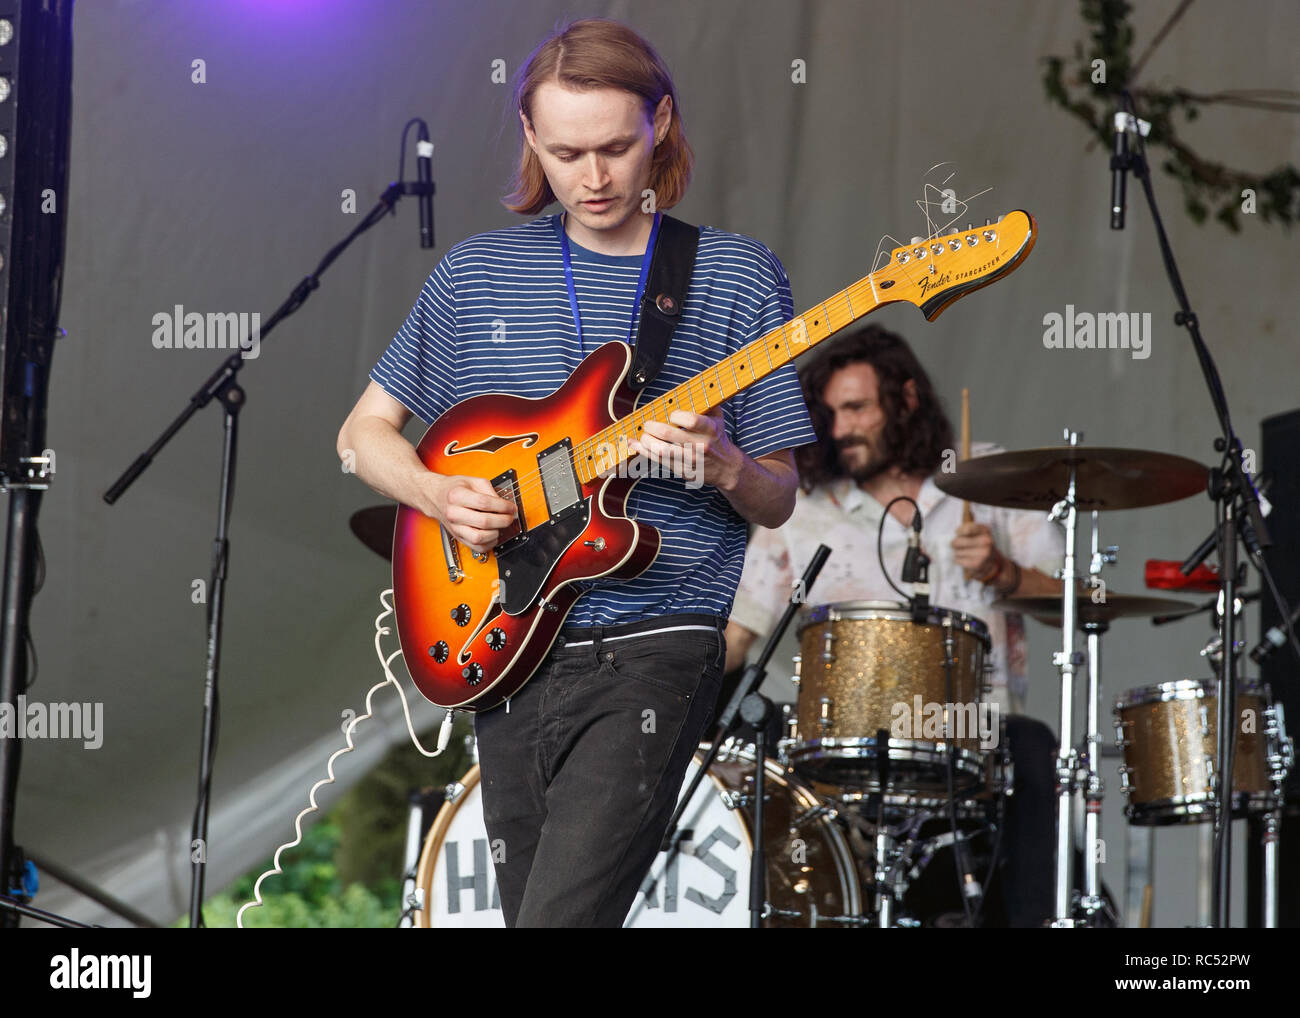 A musician playing a Fender Starcaster guitar live onstage at a music festival. Stock Photo